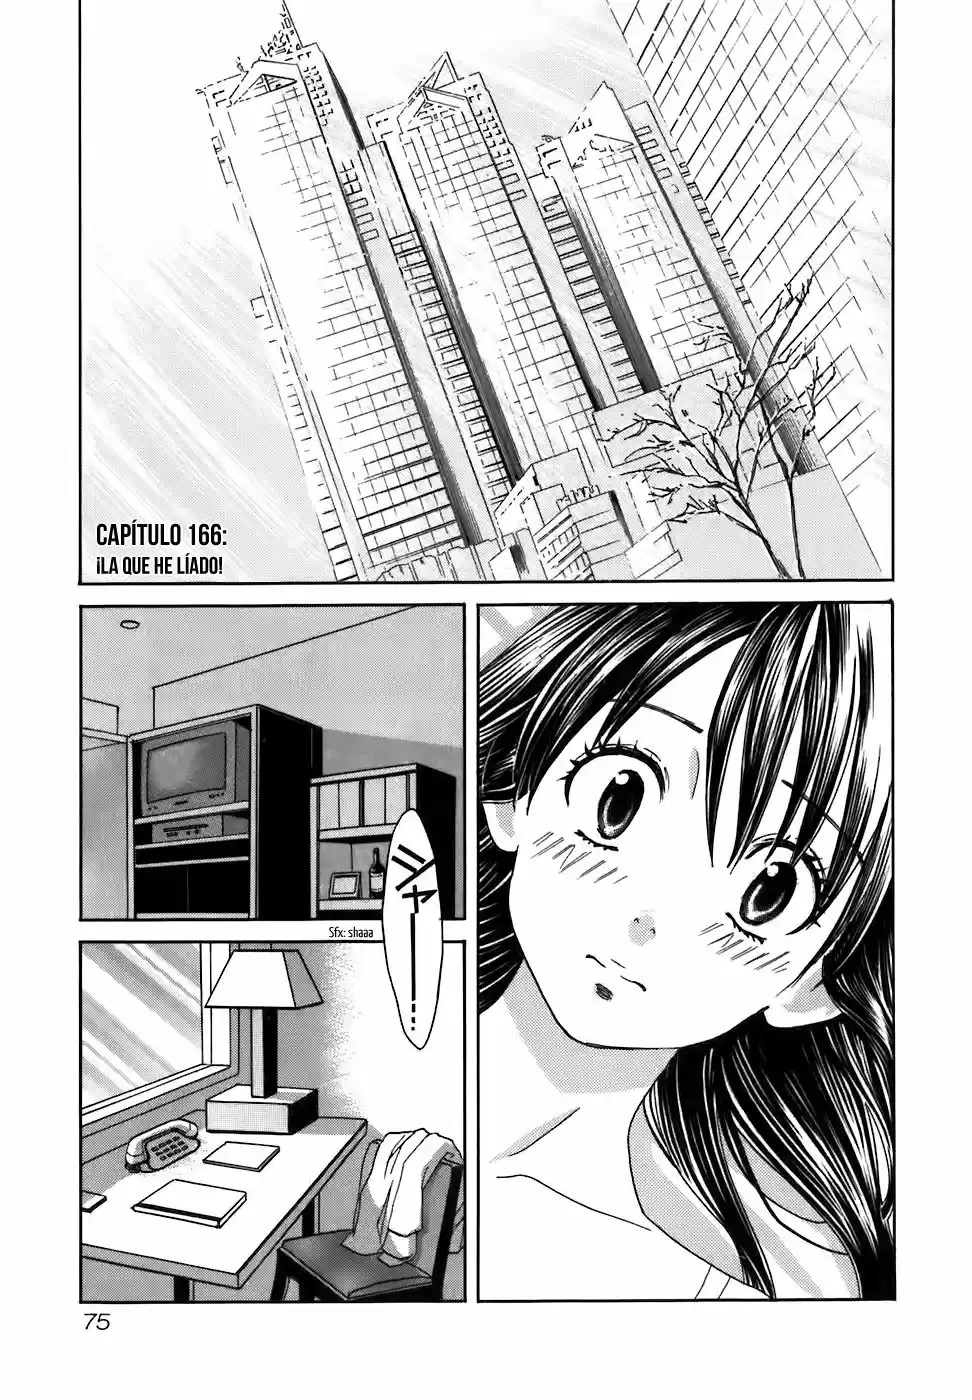 Love Junkies: Chapter 166 - Page 1